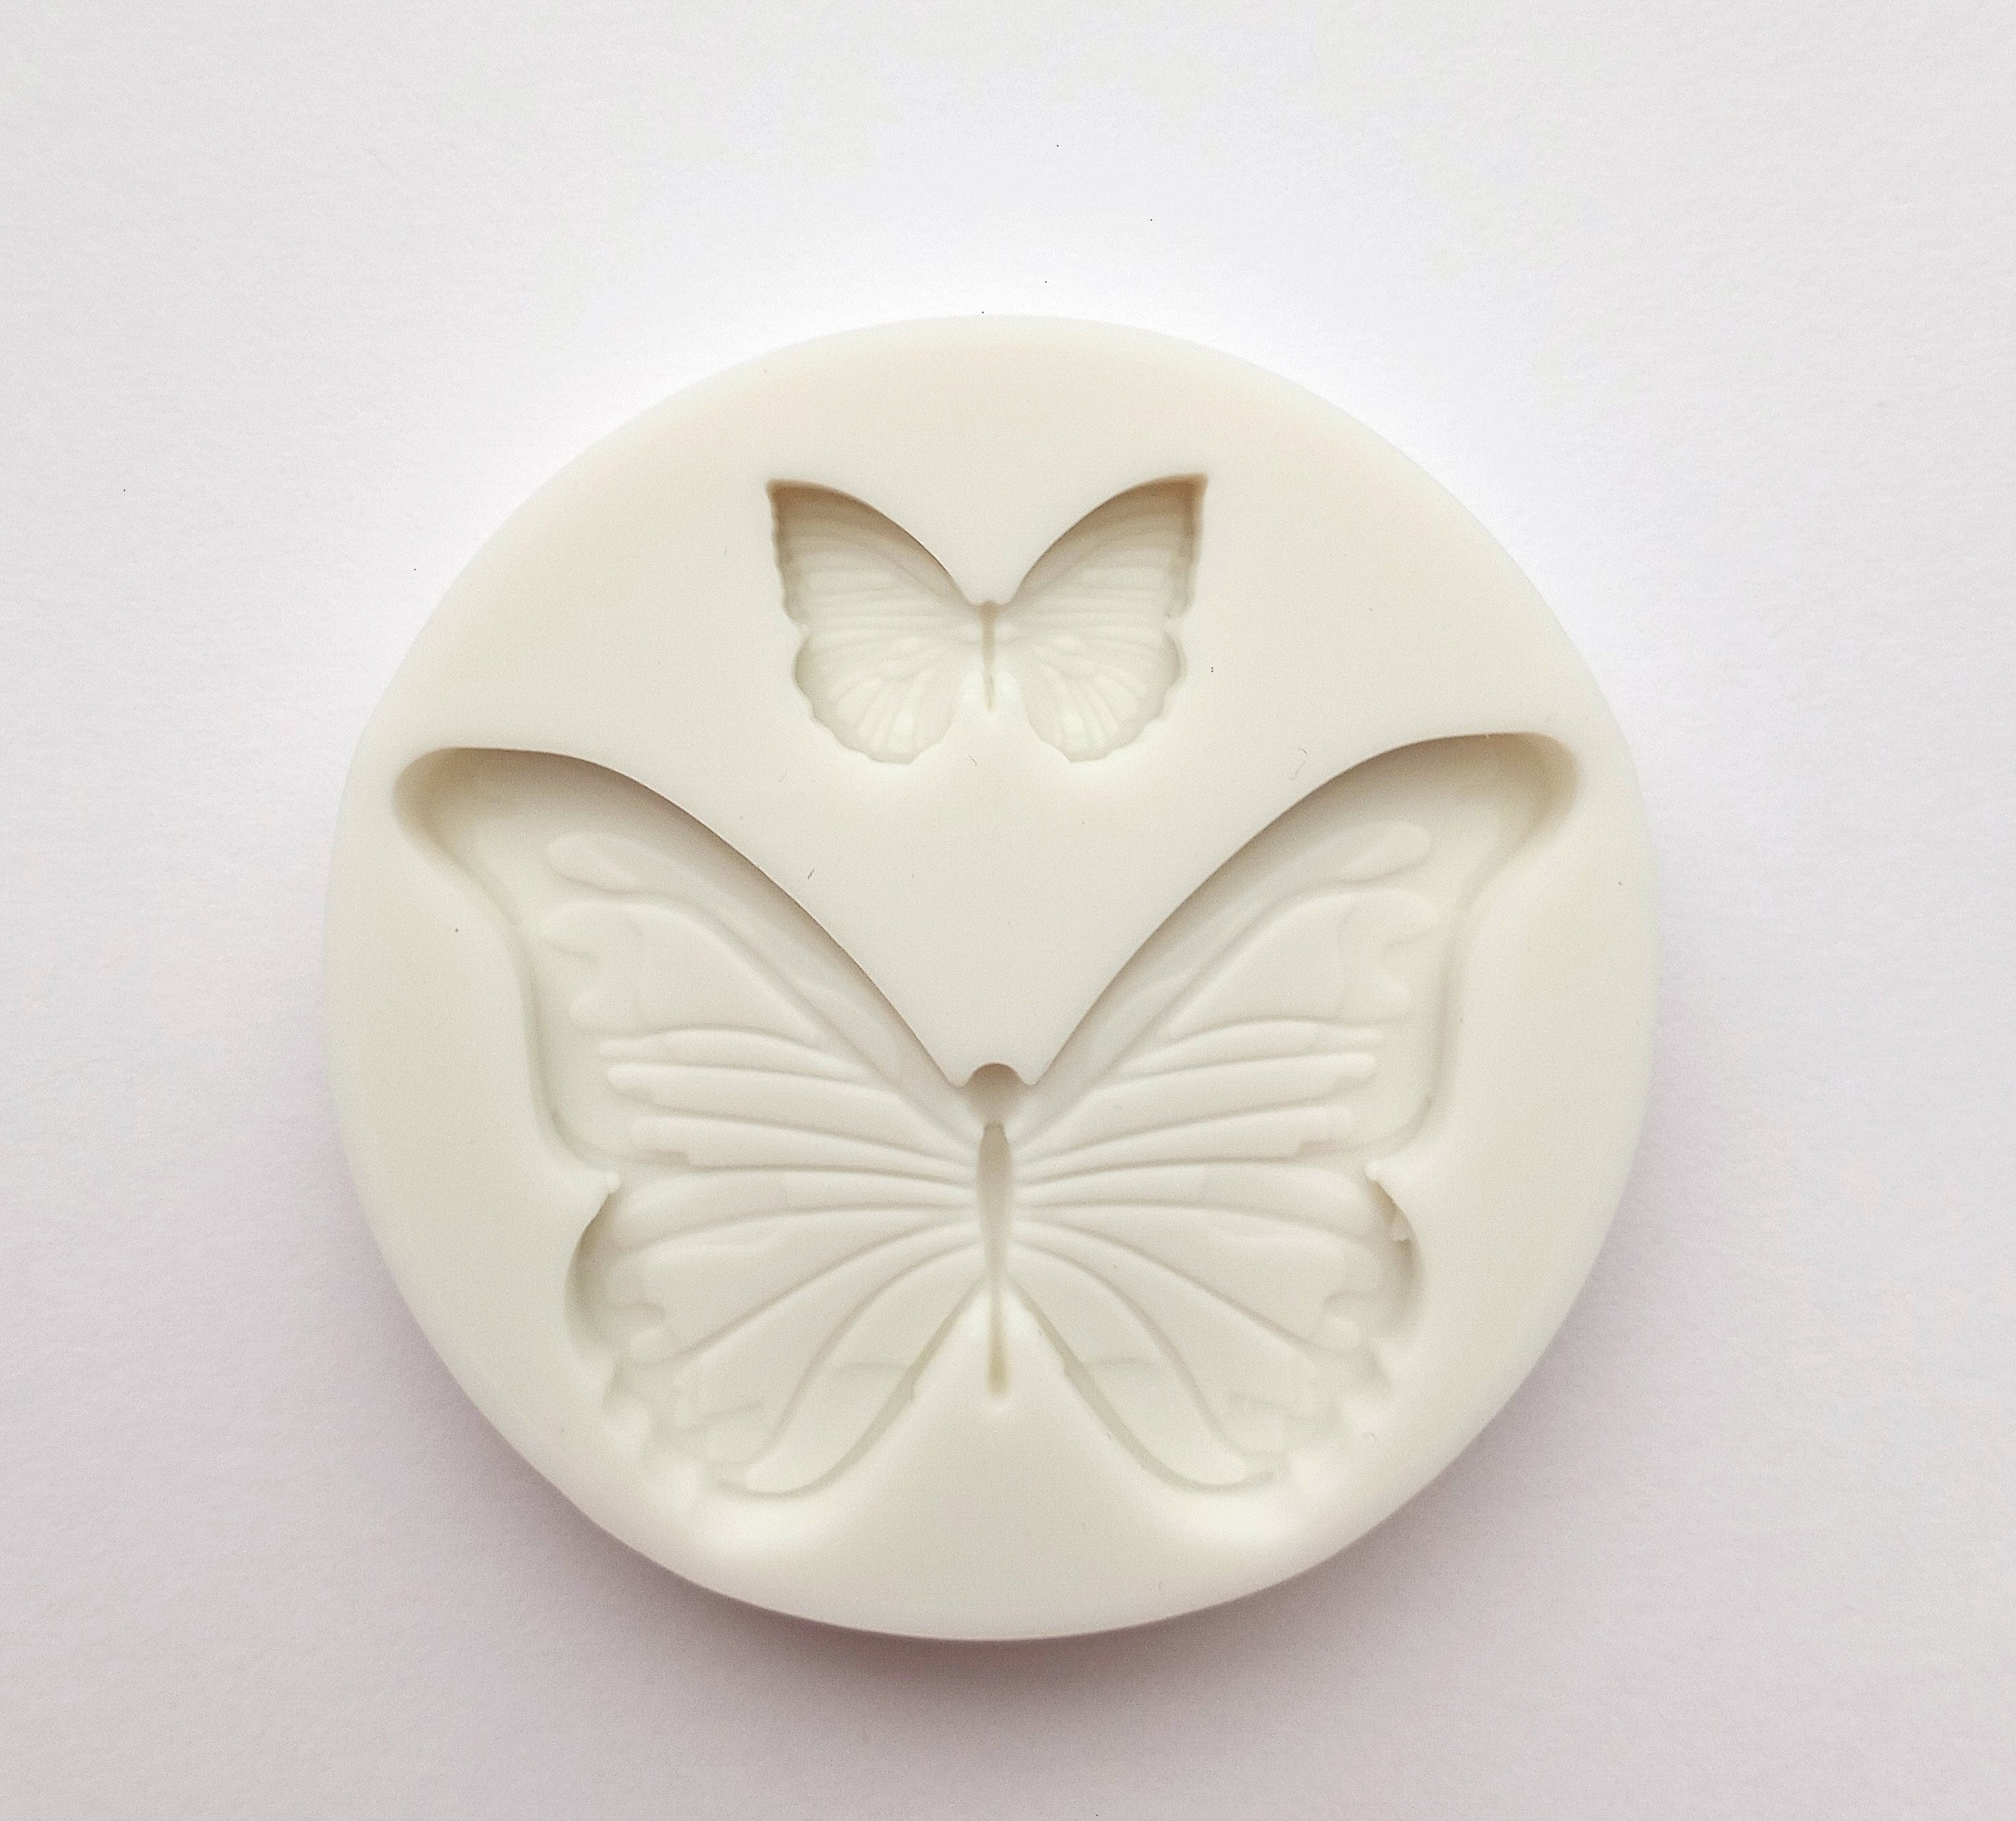 Butterfly Silicone Mold For Decorating Cookies, Cakes, Cupcakes - For  Fondant Or Chocolate - Yahoo Shopping